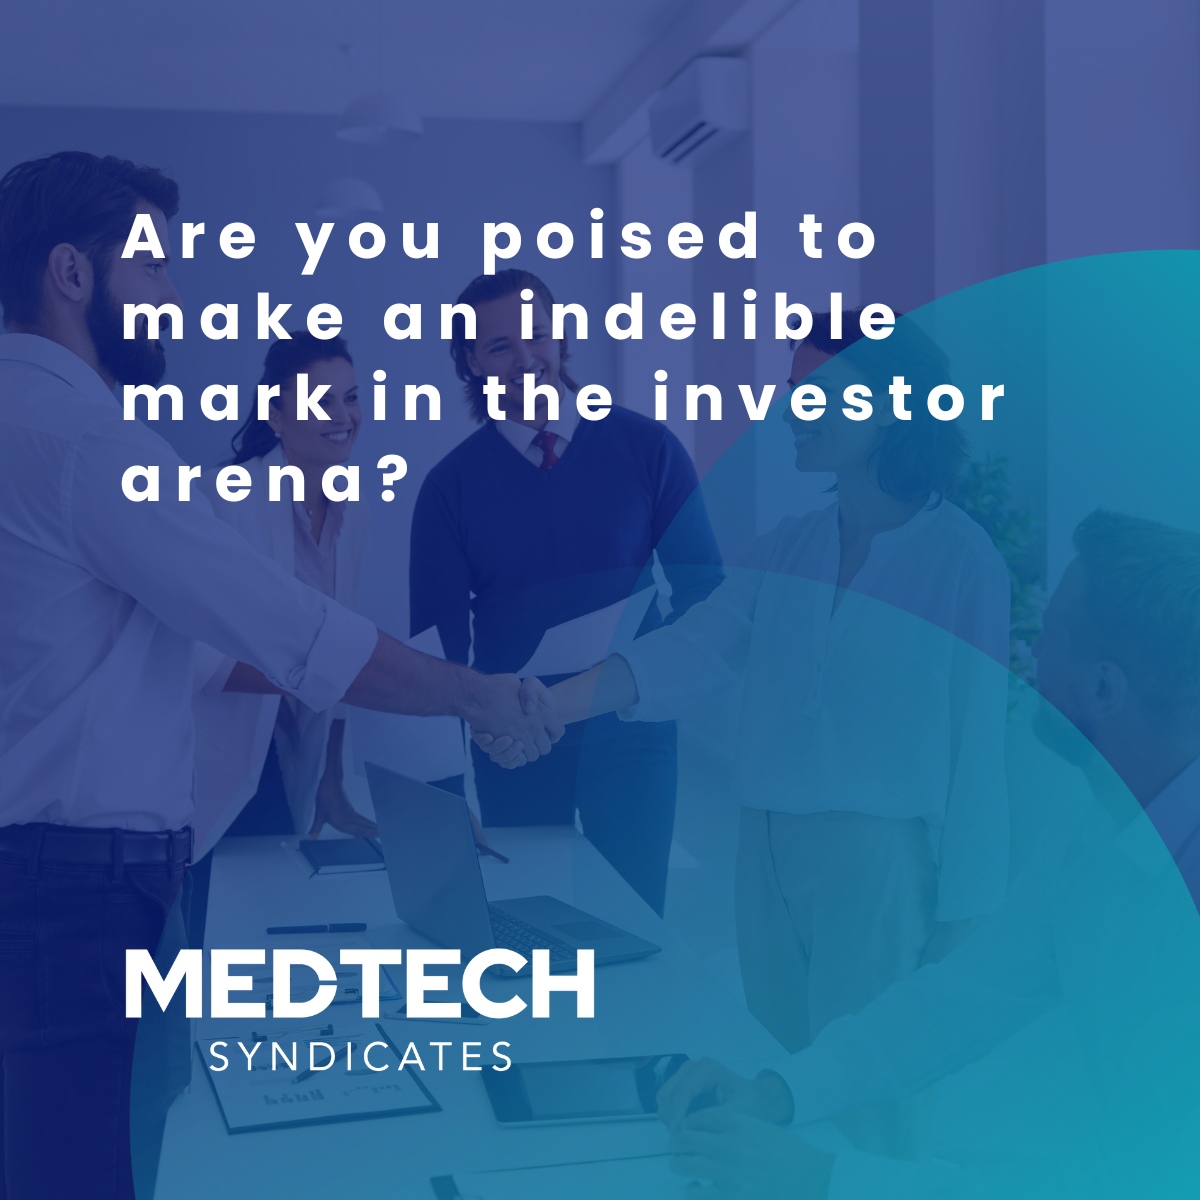 Navigating the MedTech investment terrain requires more than just groundbreaking innovations. It's about communicating your vision and potential in a manner that captivates and convinces. 💪 #MedTech #InvestorReady #SeedFunding